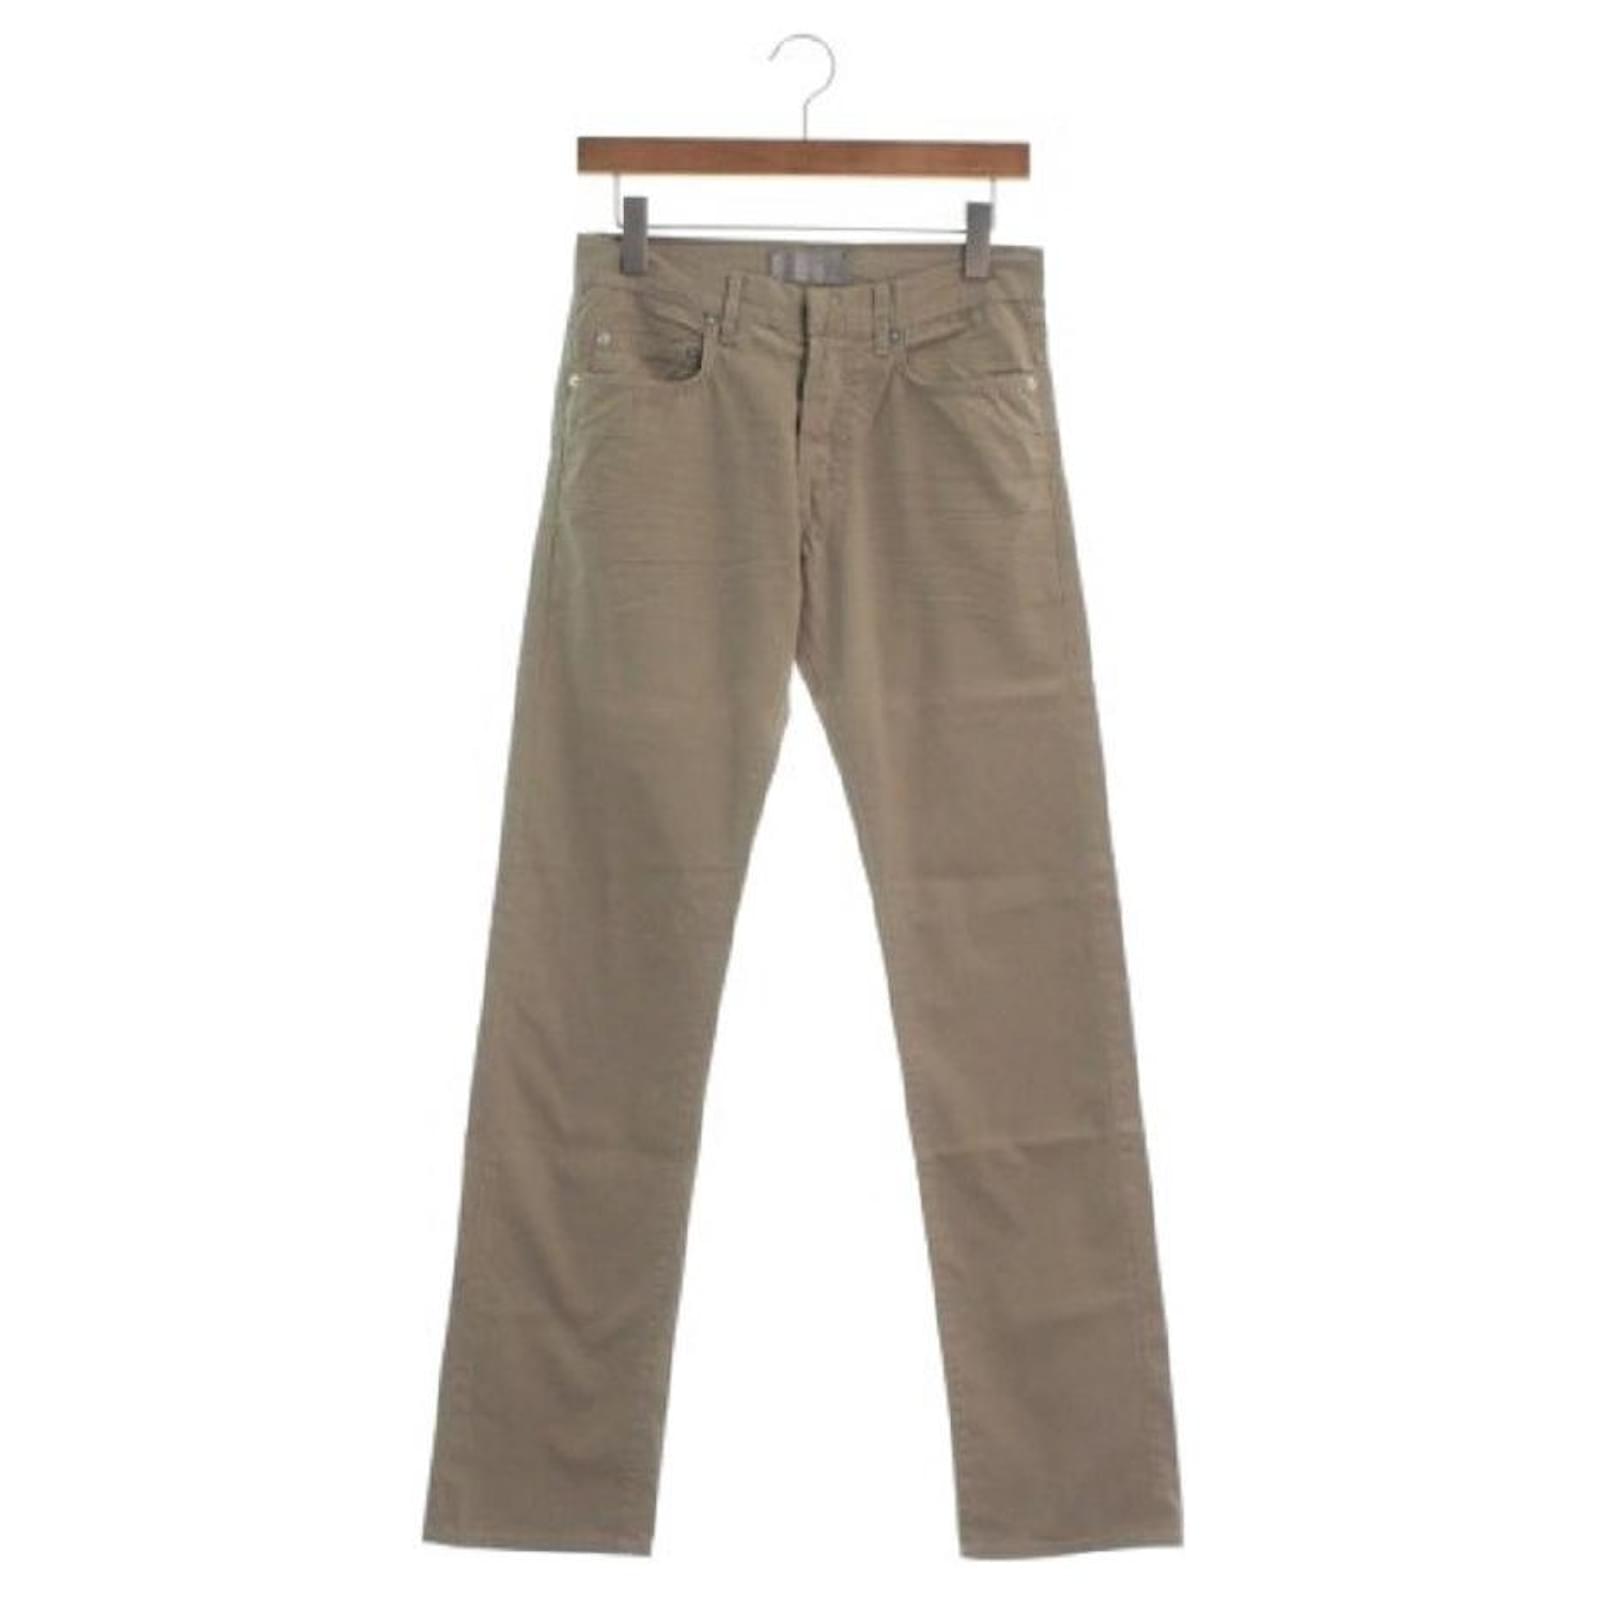 A Trendy Cargo Pants with the Best Quality. Good Quality Fabric Used. 6  Pocket Cargo Pants.